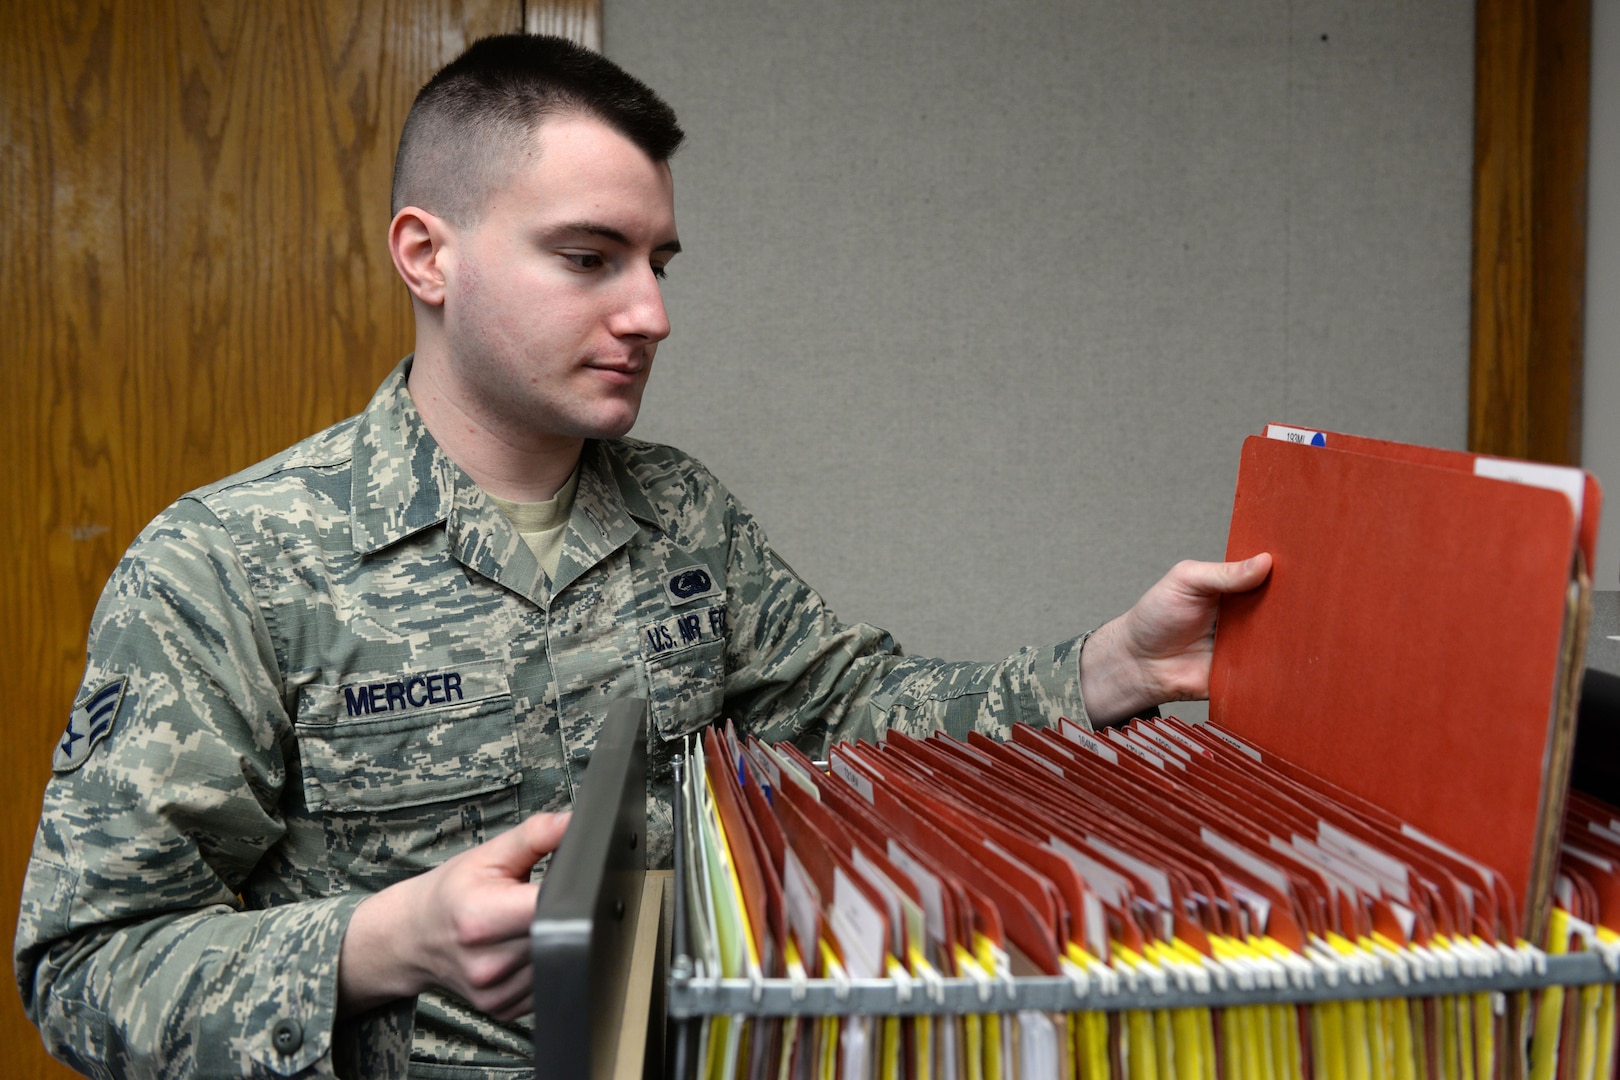 Senior Airman Christopher Mercer, with the 673d Logistics Readiness Squadron’s Equipment Accountability Element, looks through account files during a monthly inspection, Jan. 18, 2018, at Joint Base Elmendorf-Richardson, Alaska. EAE works with more than 130 different accounts serving as equipment review and authorization activity, and is responsible for updating base level data.